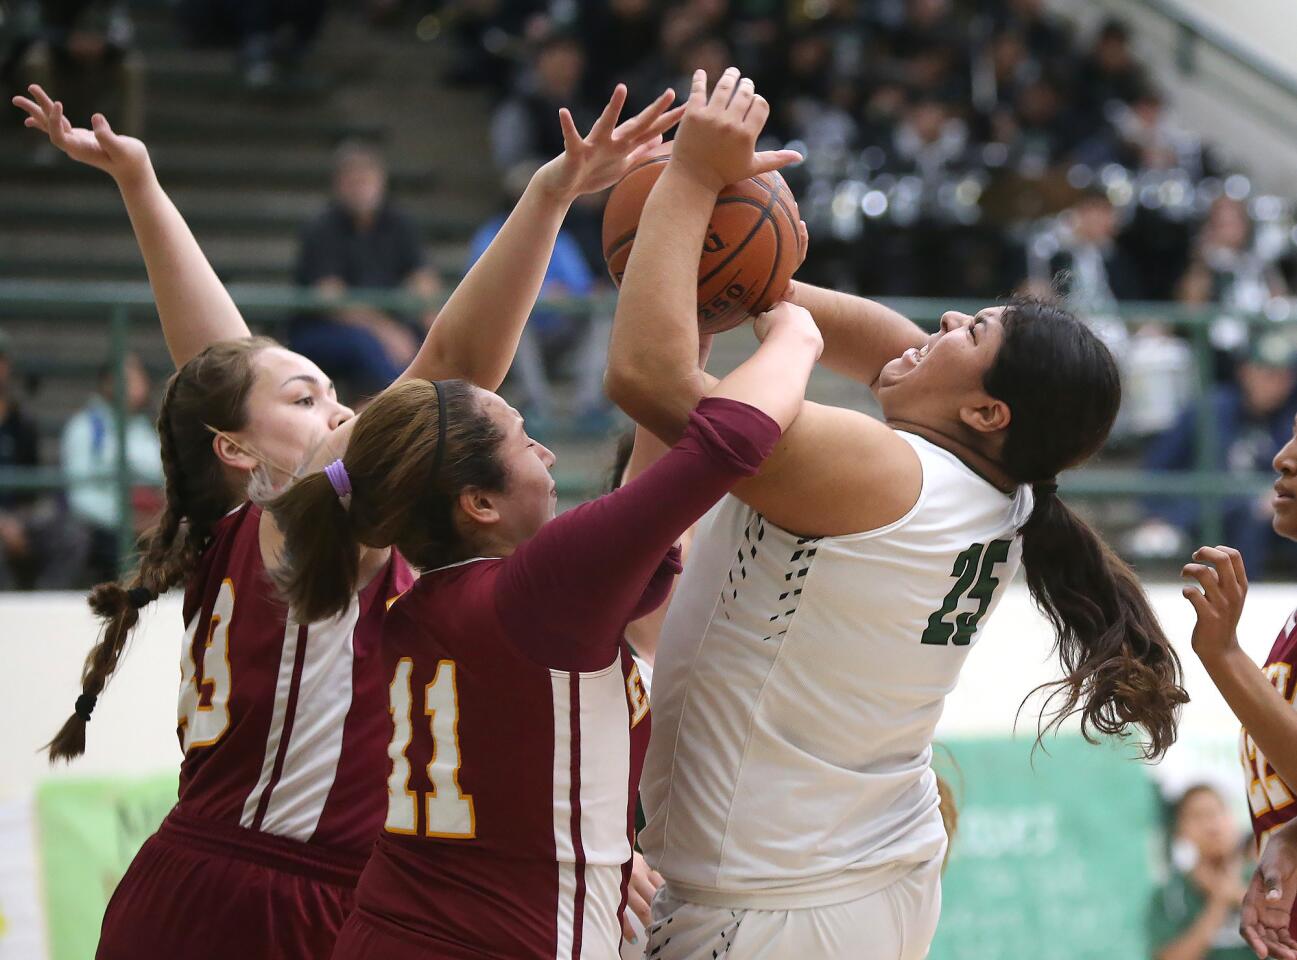 Costa Mesa High's Katie Belmontes, right, tries to get the ball up for a layup but is fouled by Estancia's Pam Cabezaz (11) during an Orange Coast League girls' basketball game on Tuesday.